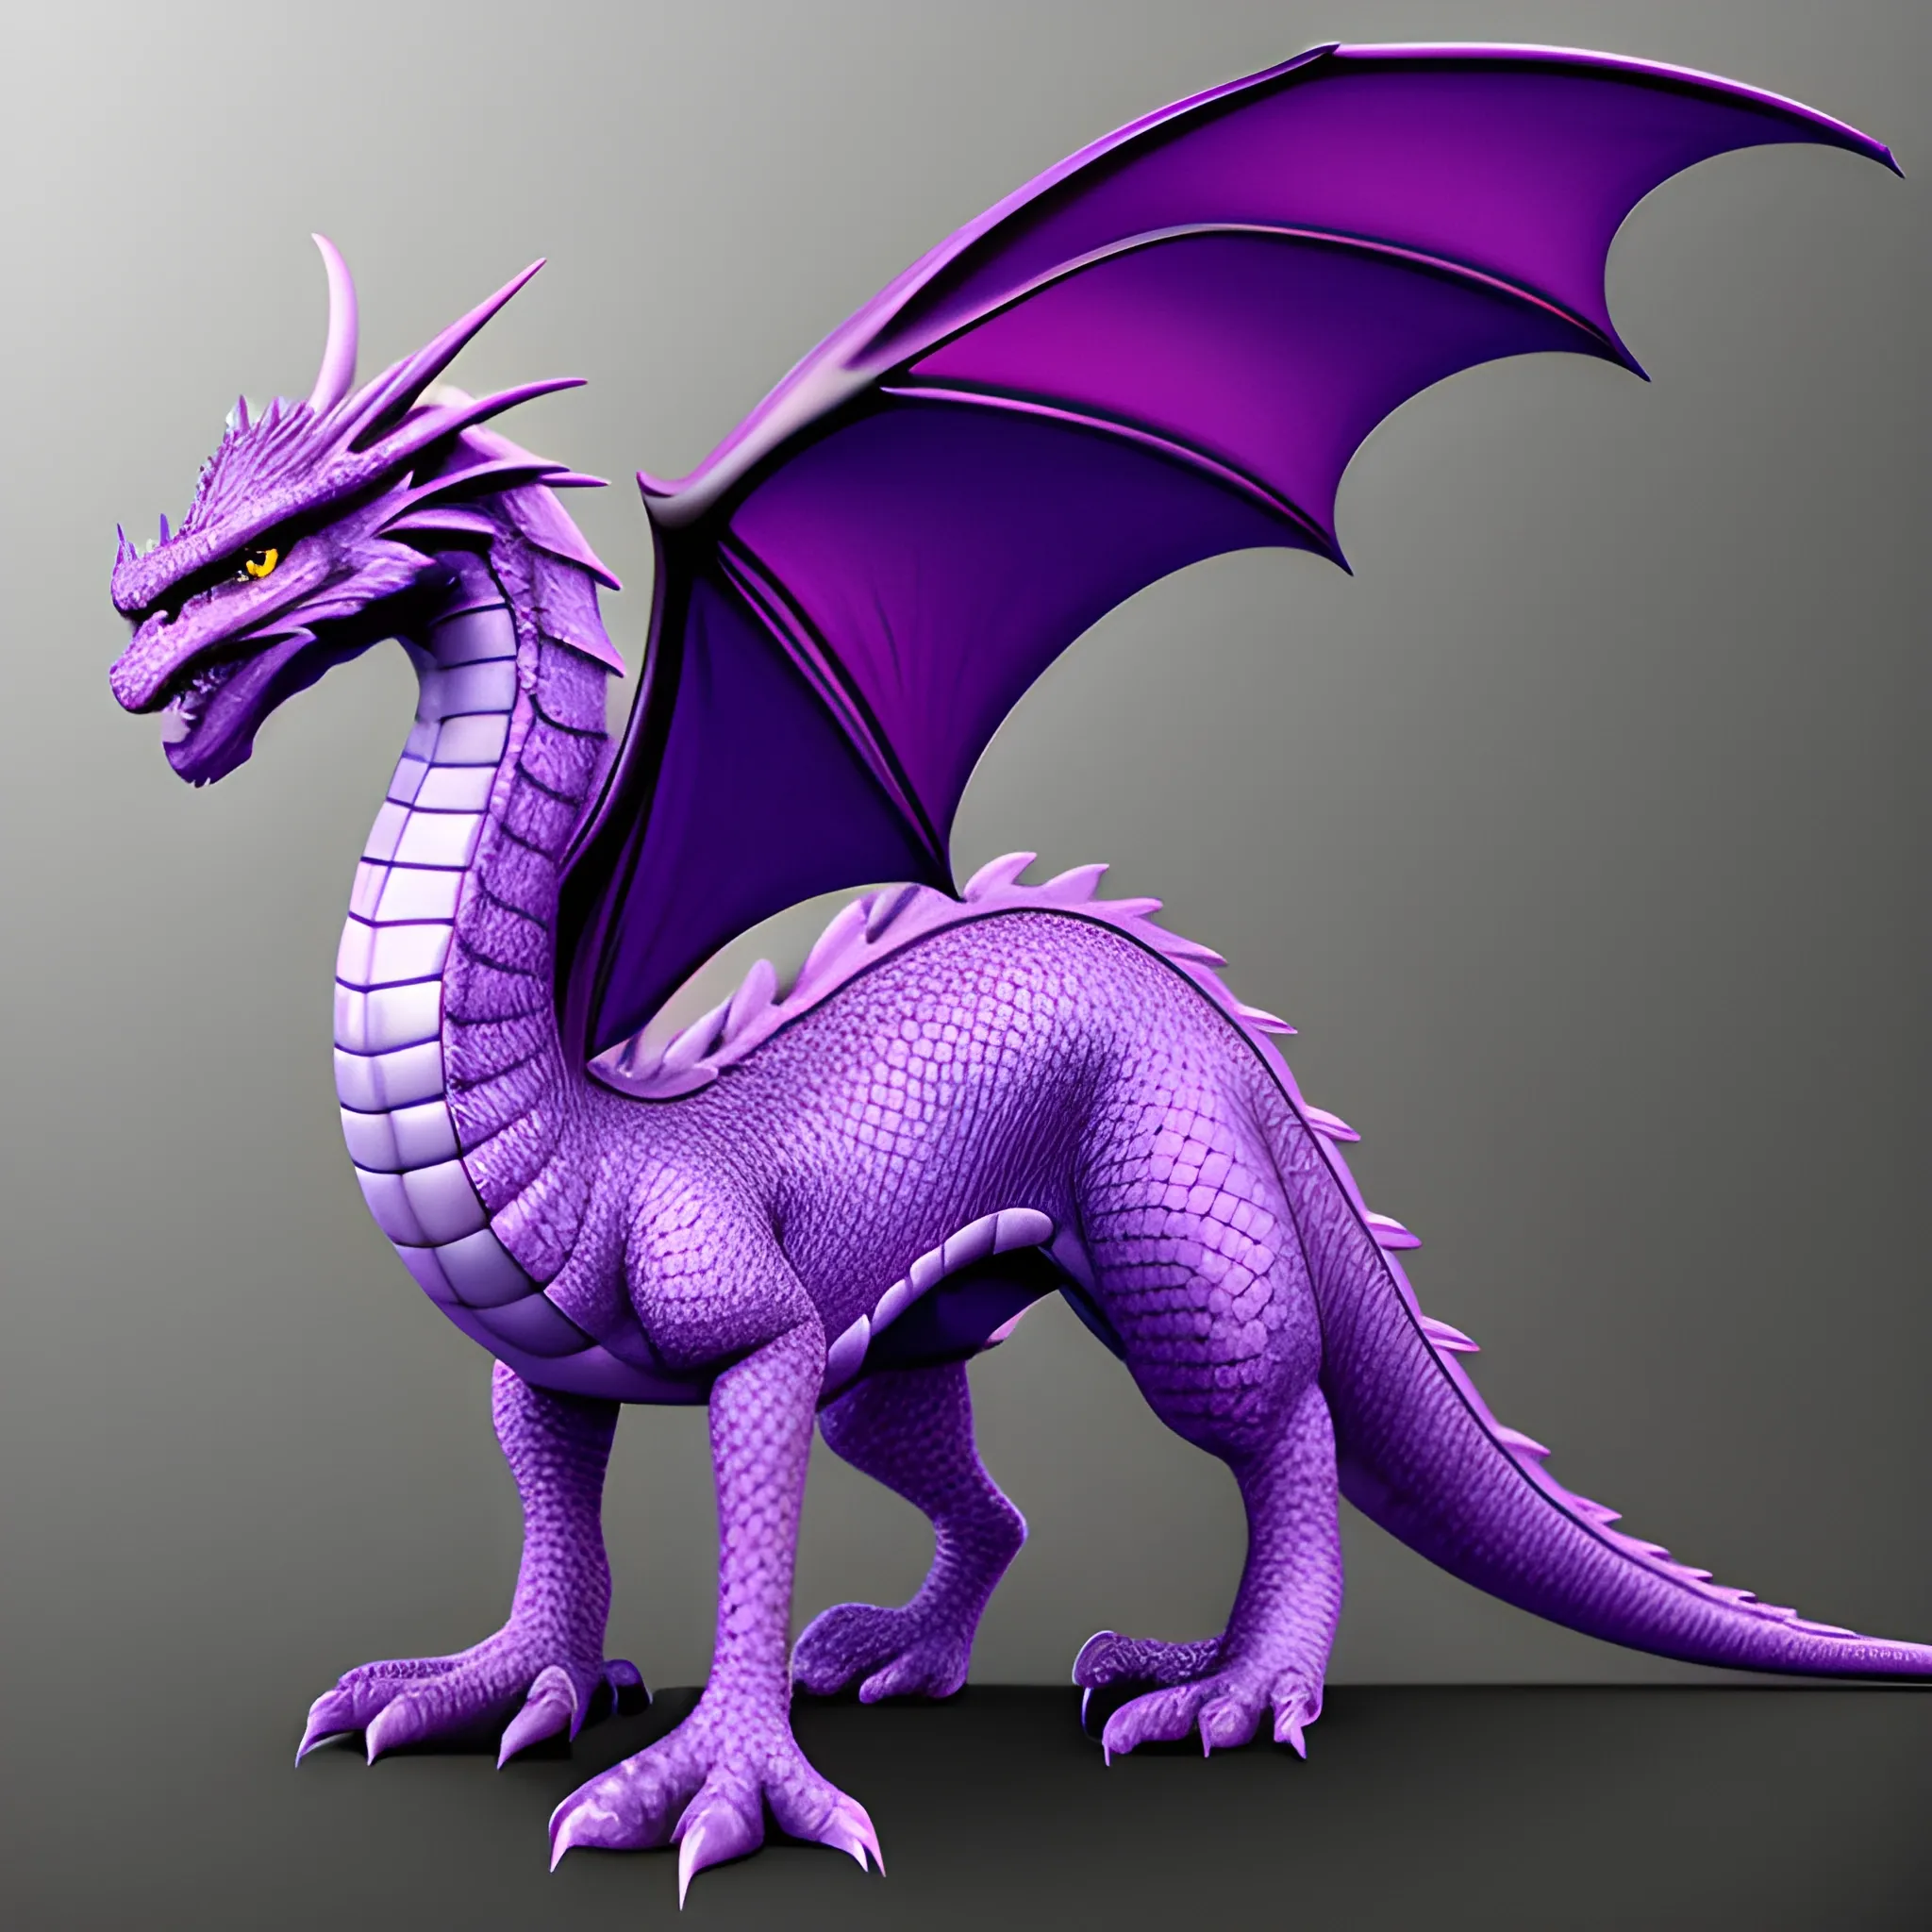 Dragon, PNG, realistic cartoon, withe and purple 4k